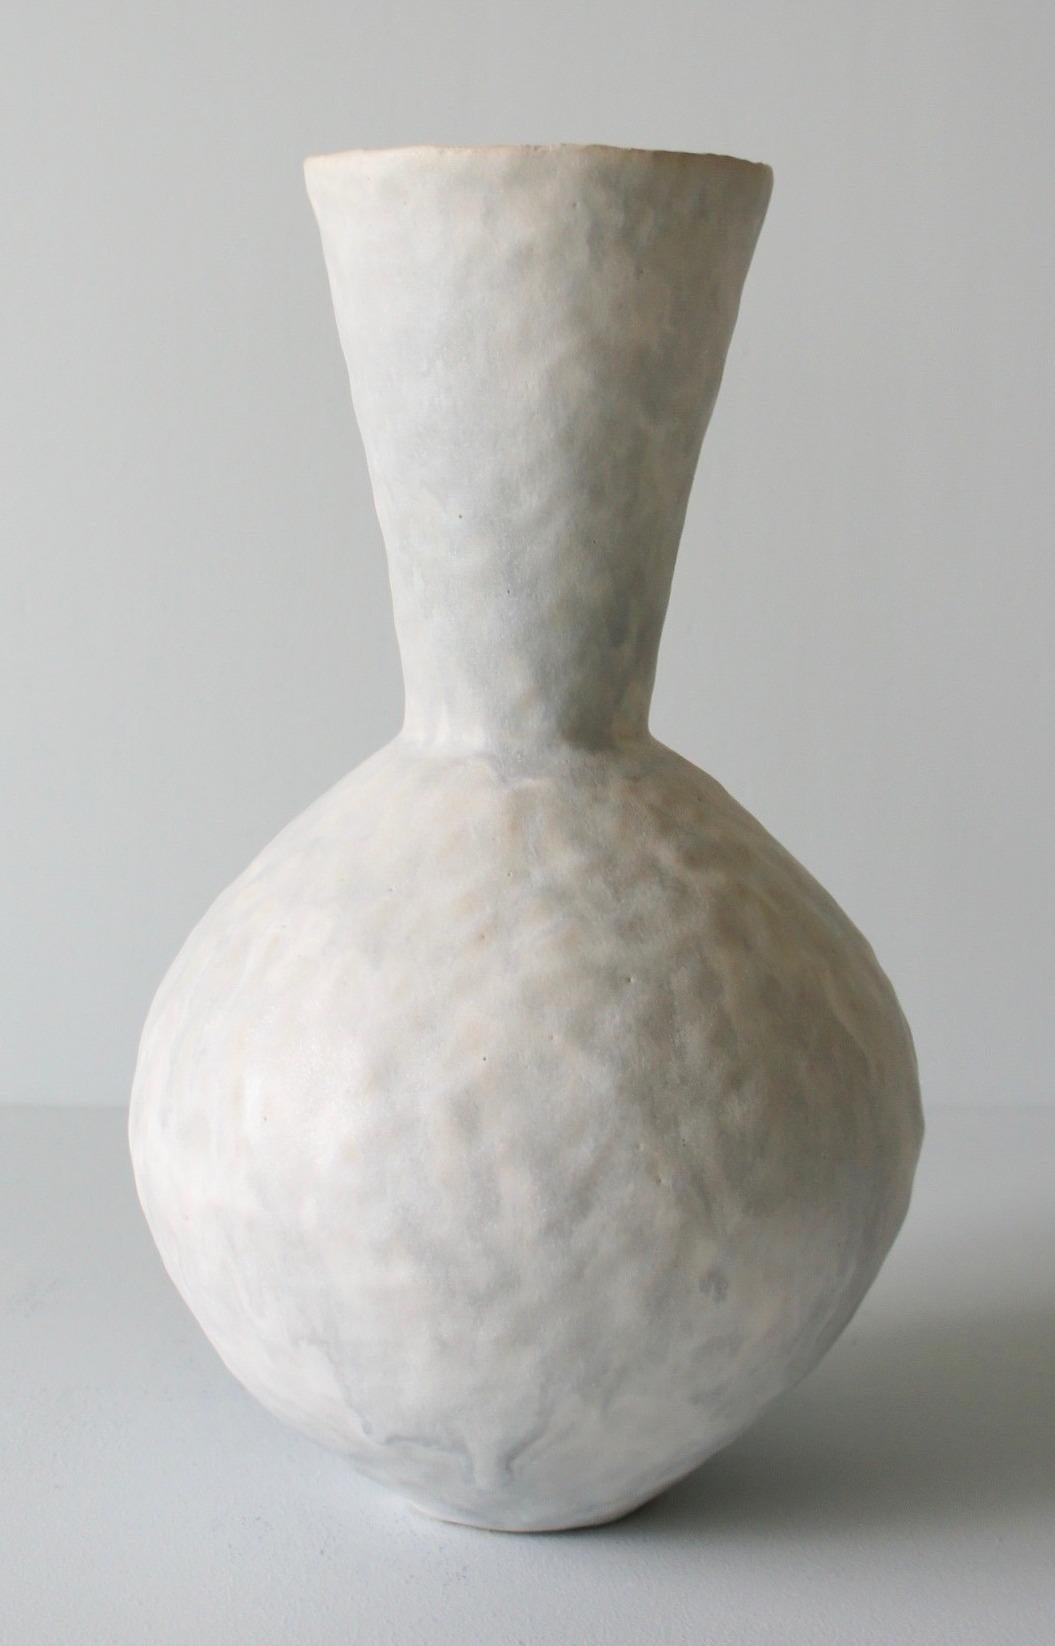 Contemporary American ceramic artist Giselle Hicks' glazed pale grey stoneware vase is part of her Vessel series. Each form is built by hand using a coil and pinch technique. They are formal explorations in shape, volume, color and composition. The